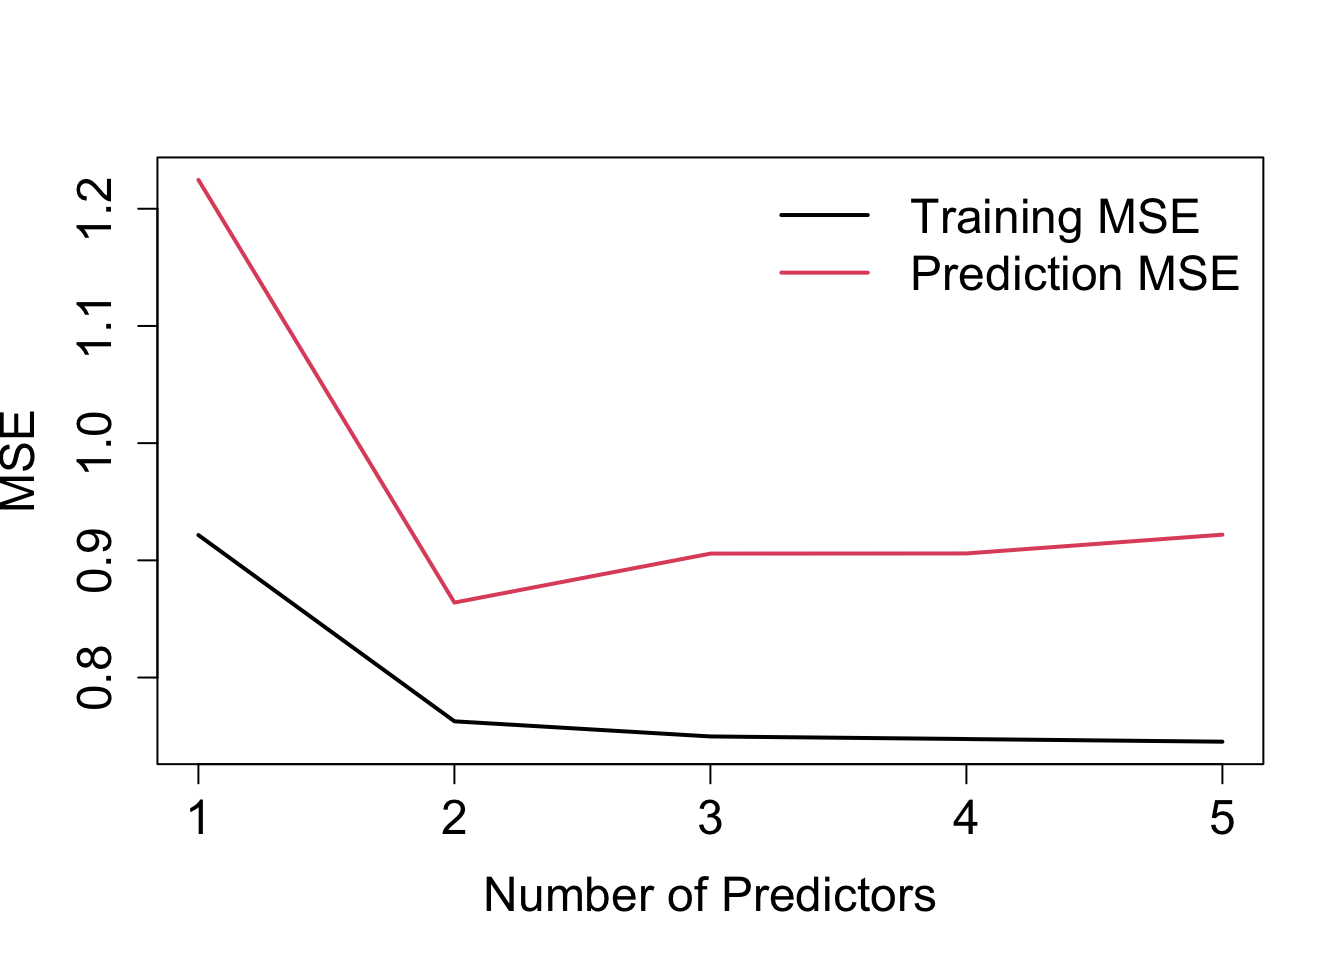 Training MSE and prediction MSE against number of predictors.